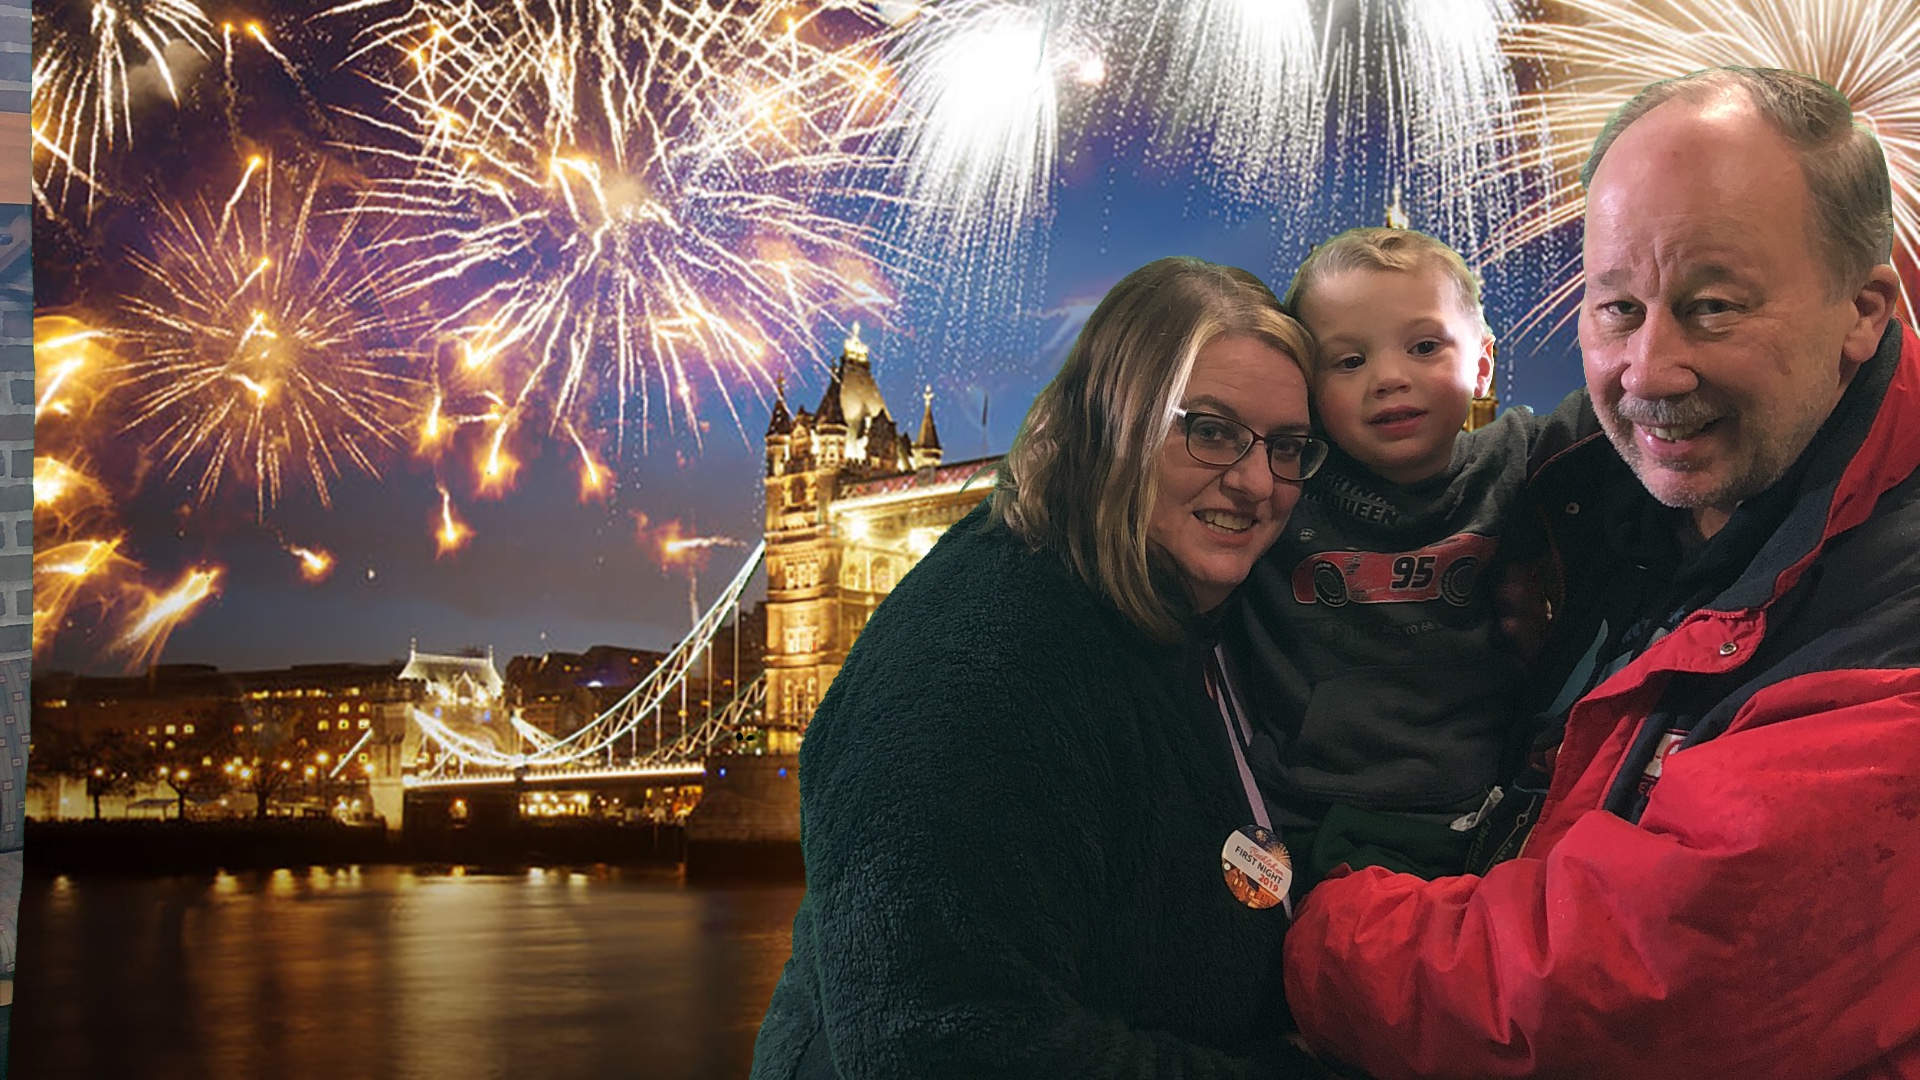 woman and man holding a child with london bridge and fireworks in the background